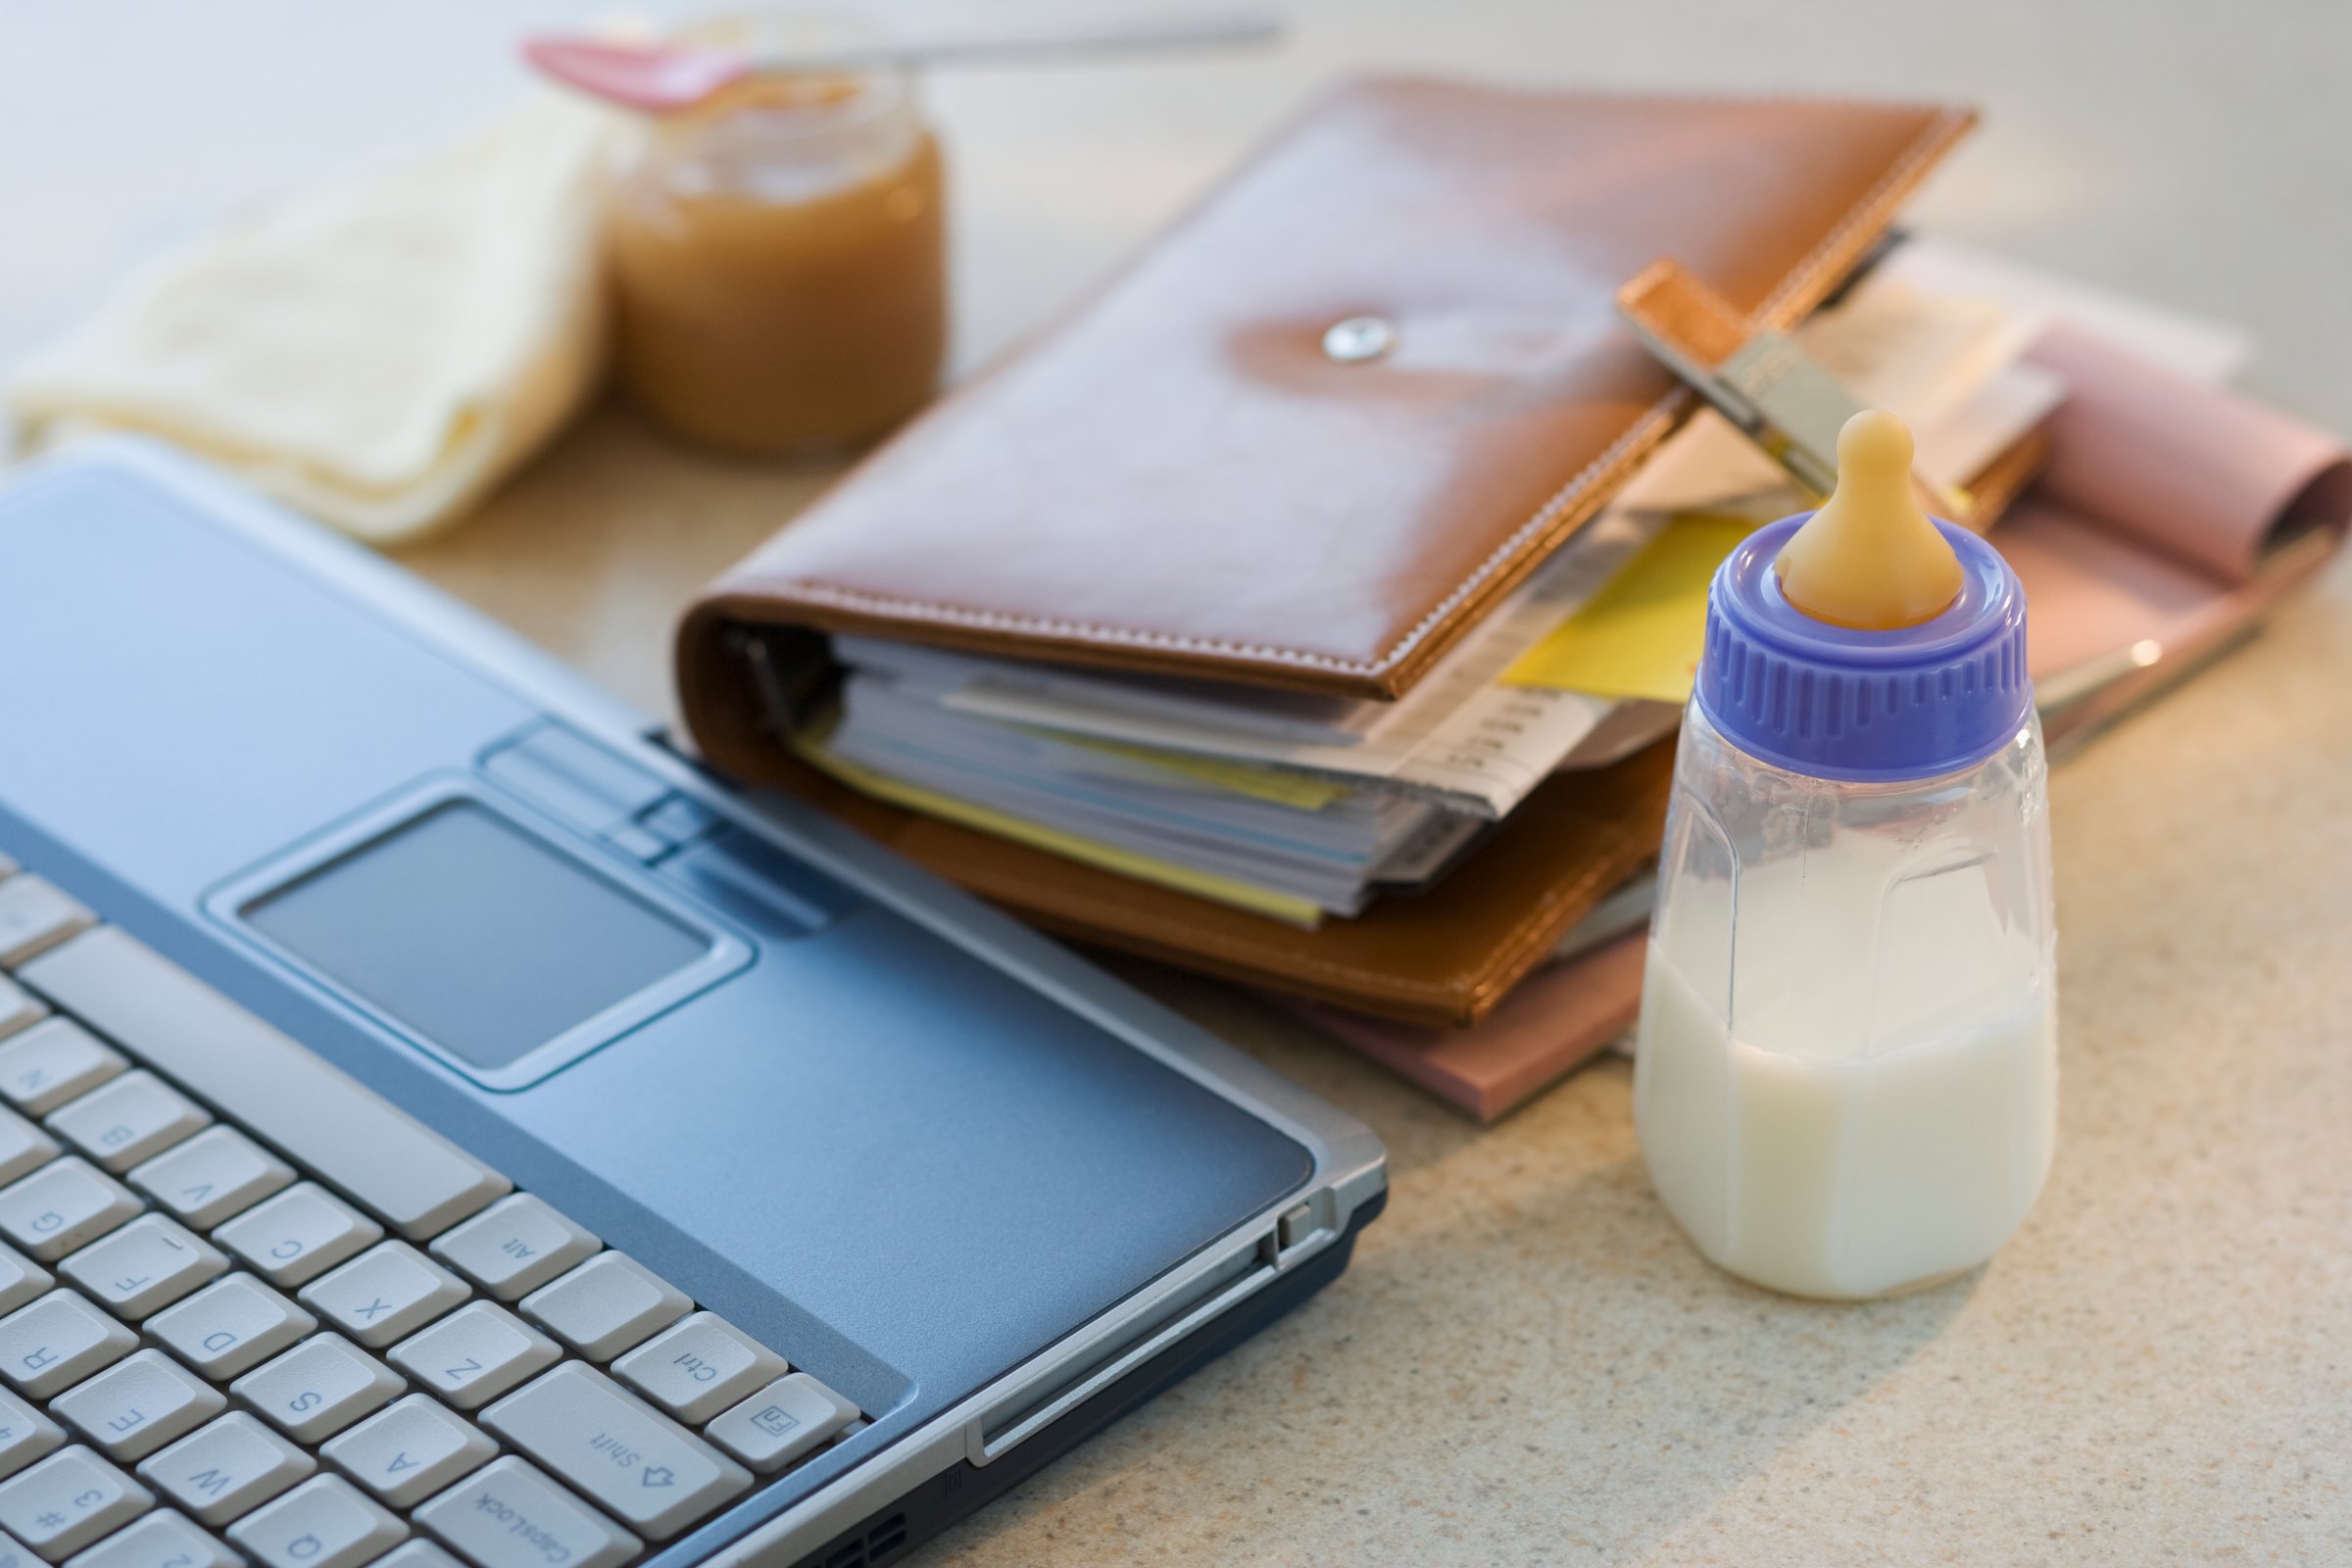 Laptop, planner and baby bottle on table